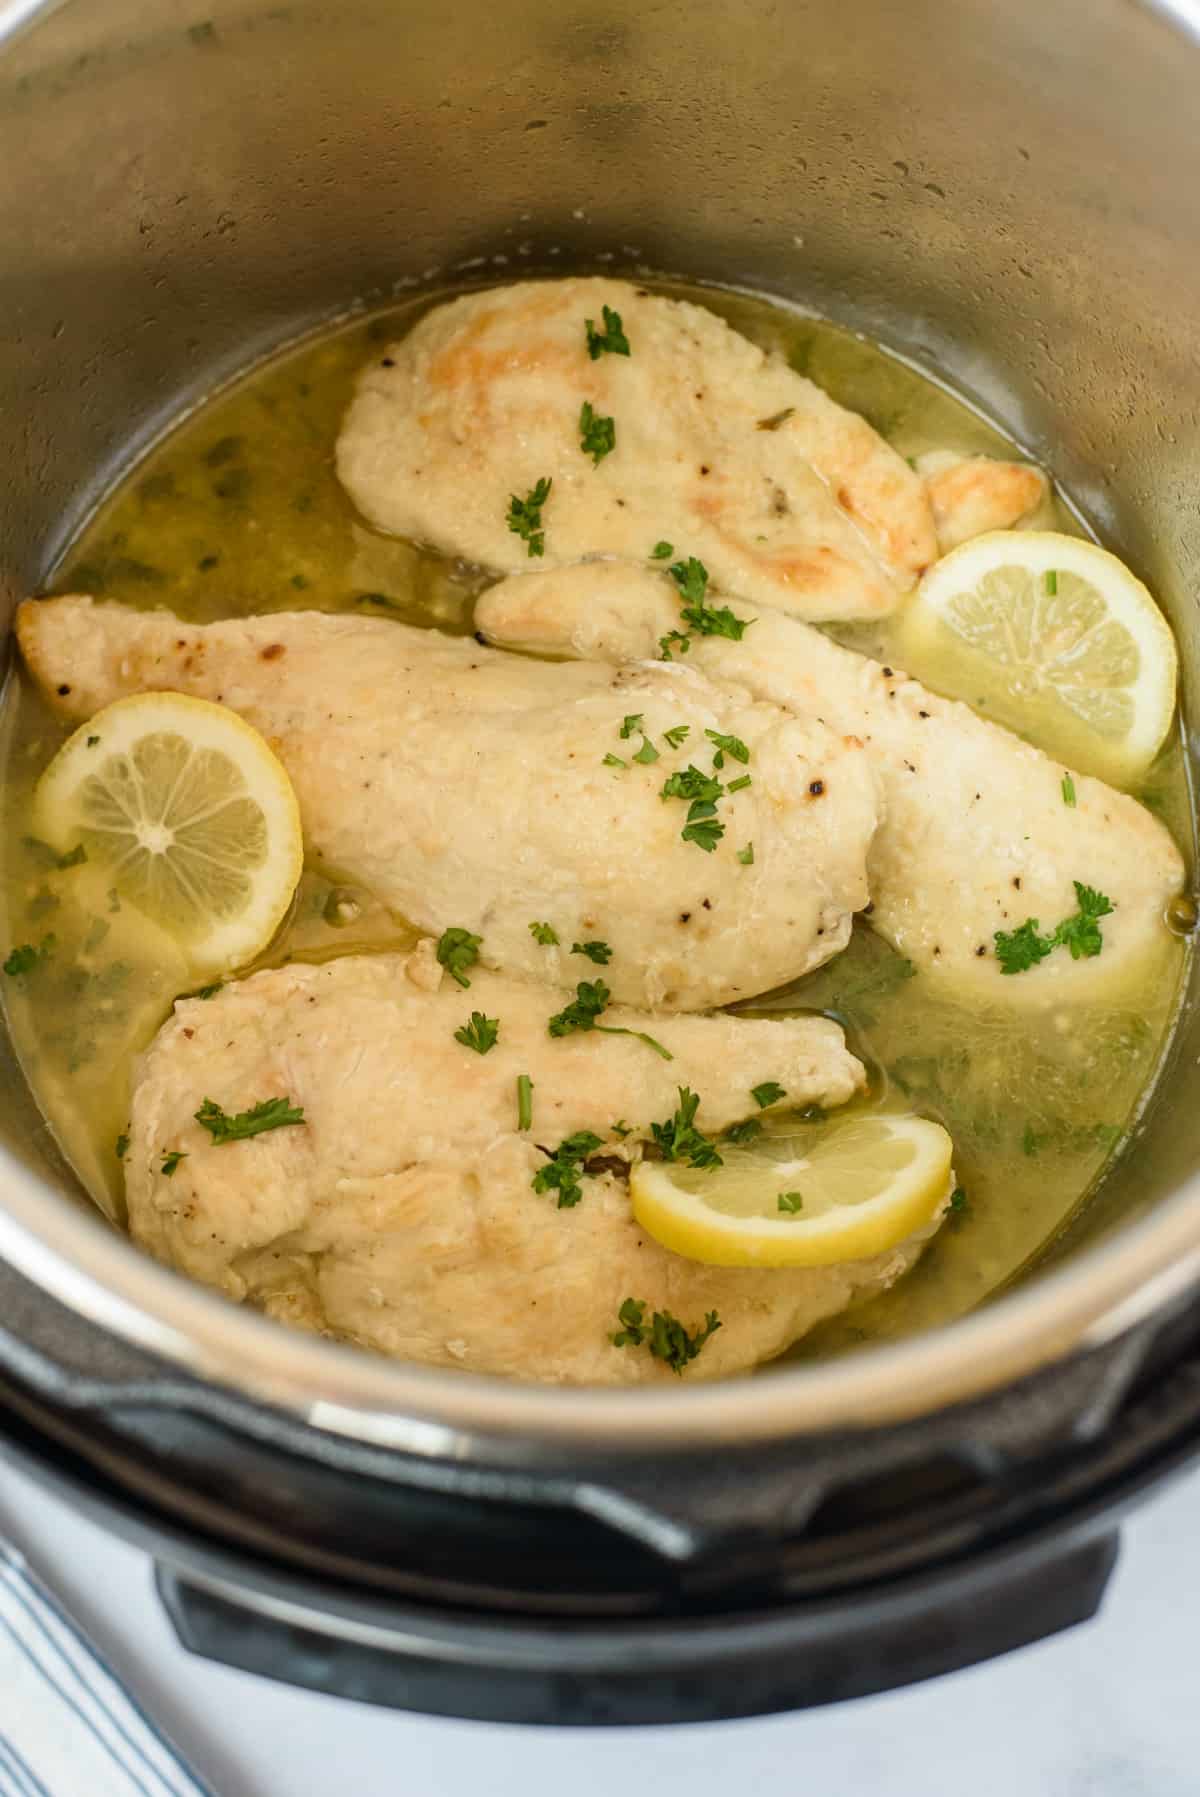 Instant Pot filled with chicken piccata after cooking.